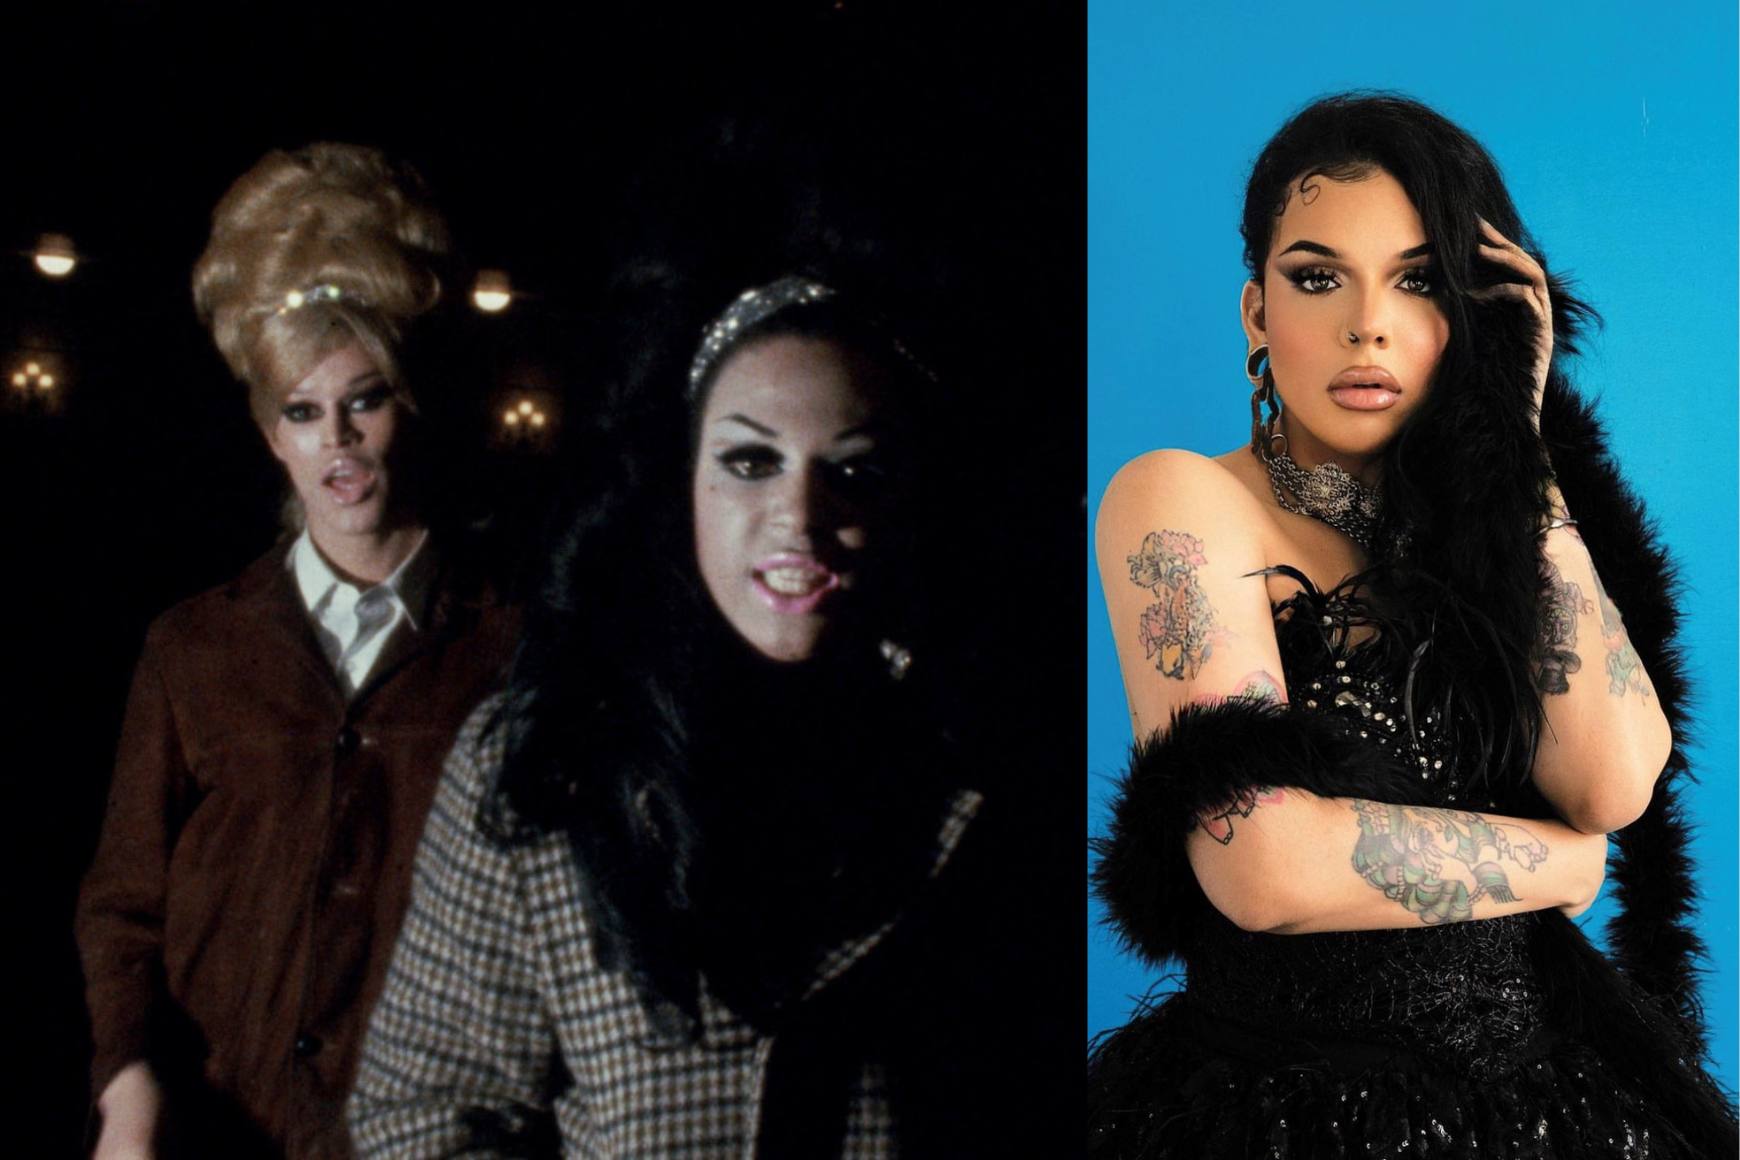 Crystal LaBeija and a fellow drag performer yell at the camera in a still from thge queen. On the right, a headshot of the drag performer Aja who gazes seductively at the camera. 